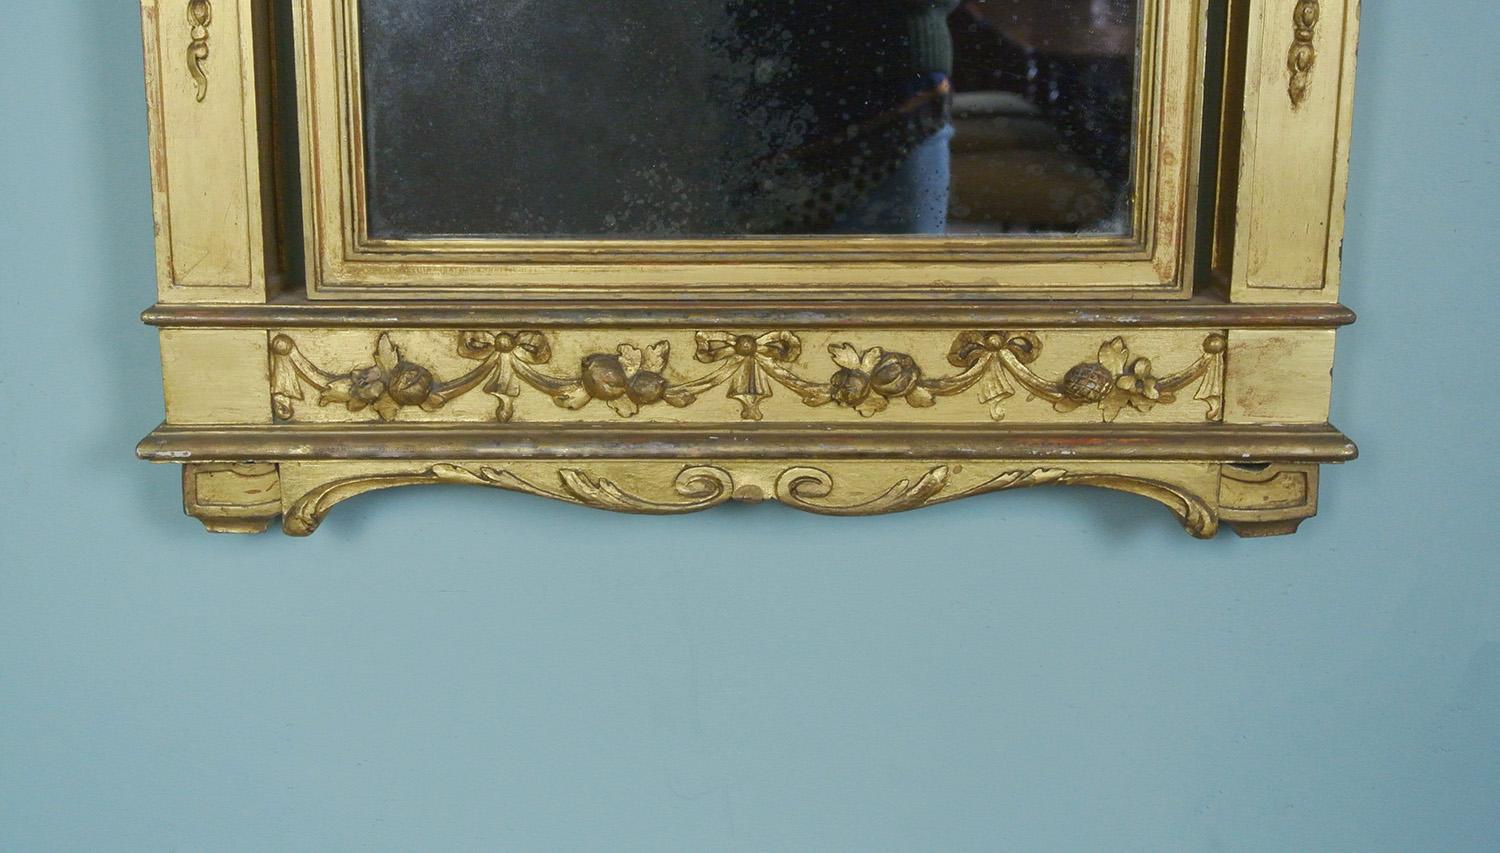 Mirror Superb Large George III Giltwood Neoclassical Pier Glass with Original Plate For Sale